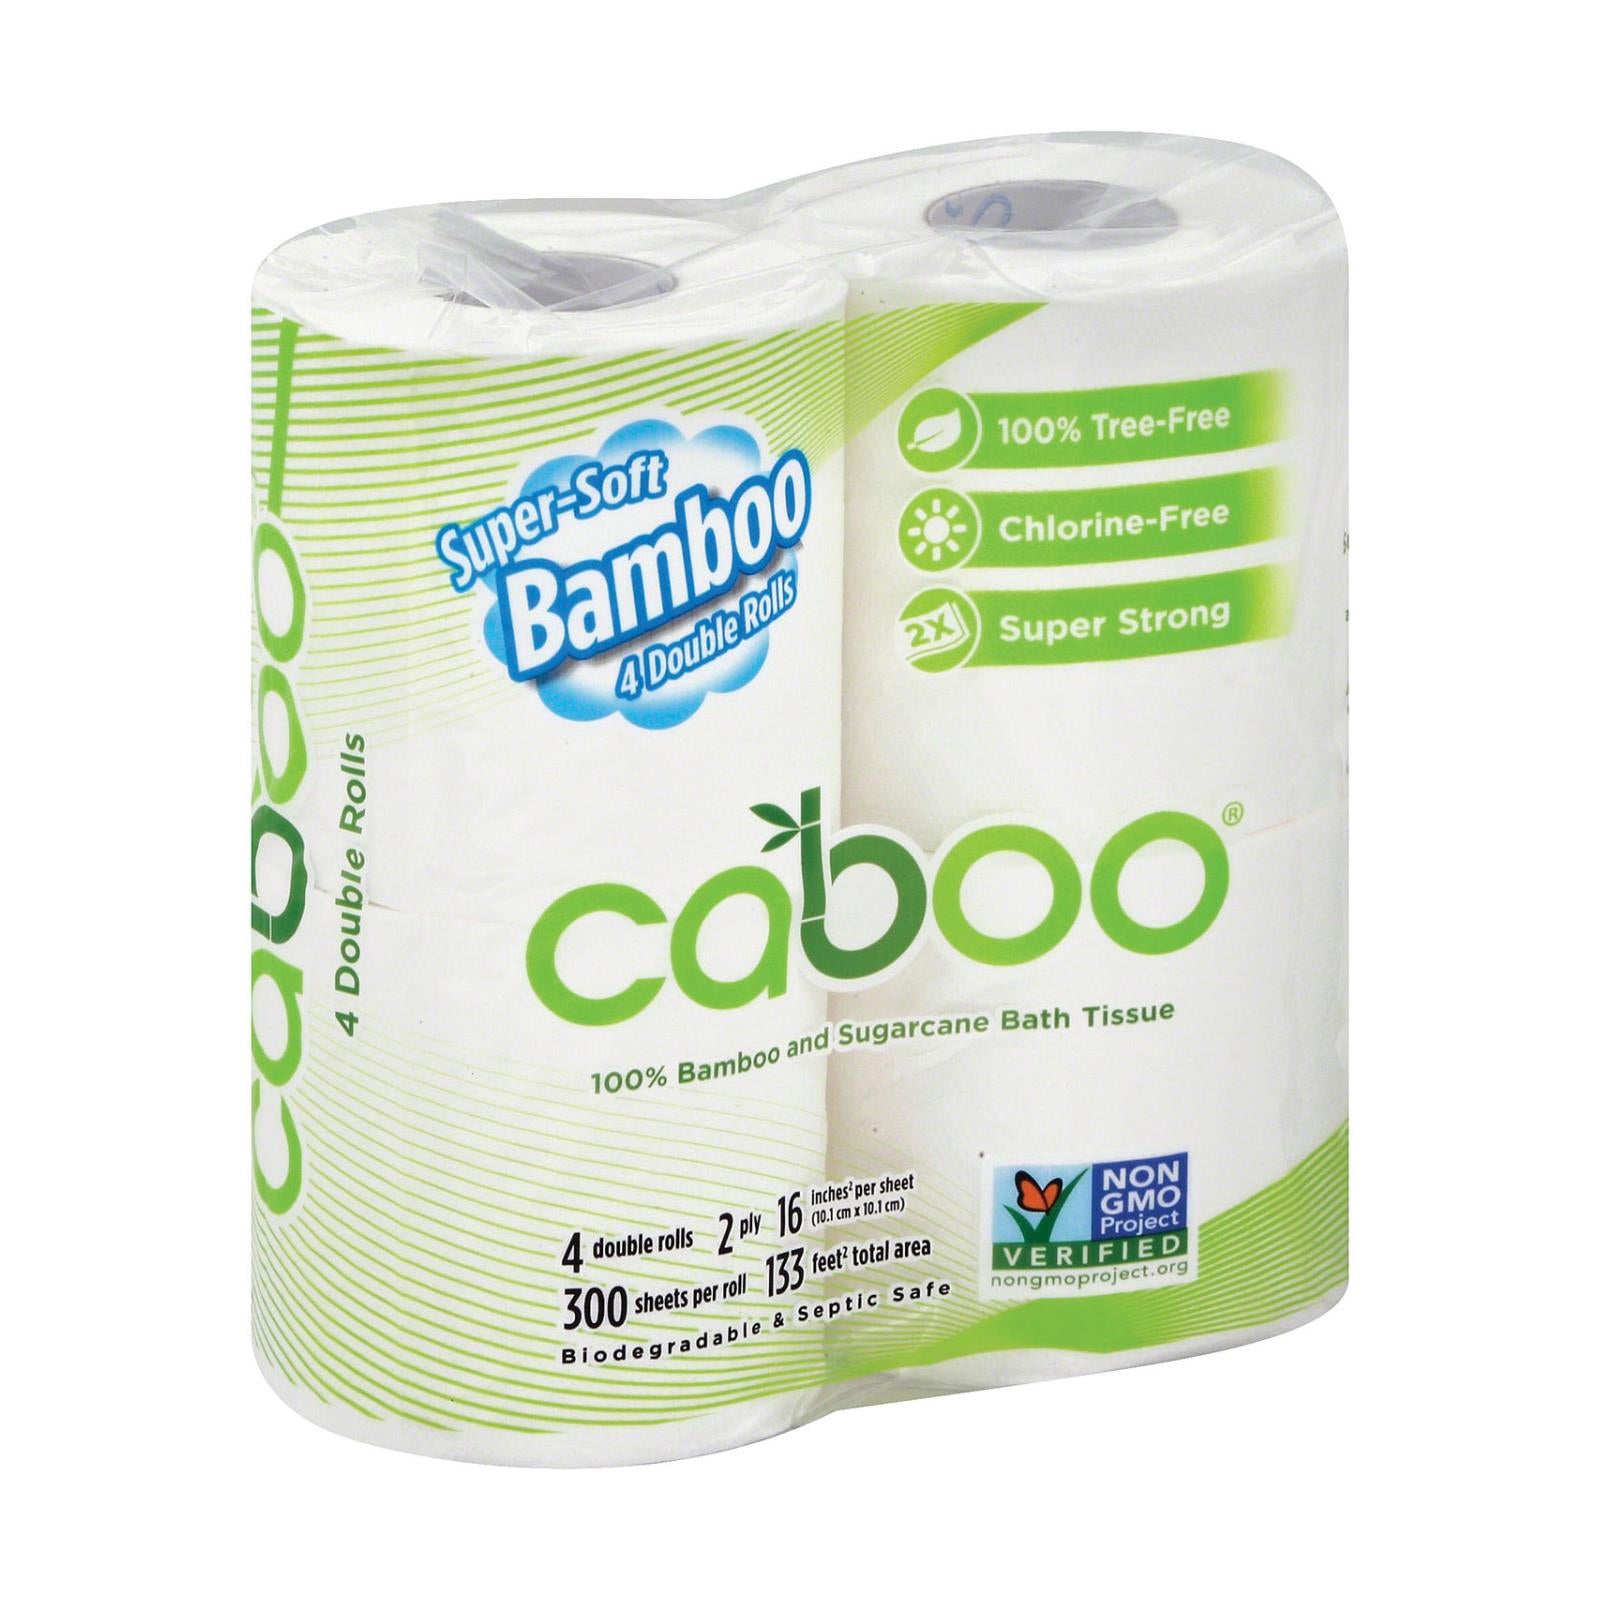 Caboo - Bathroom Tissue - Case Of 10 - Whole Green Foods